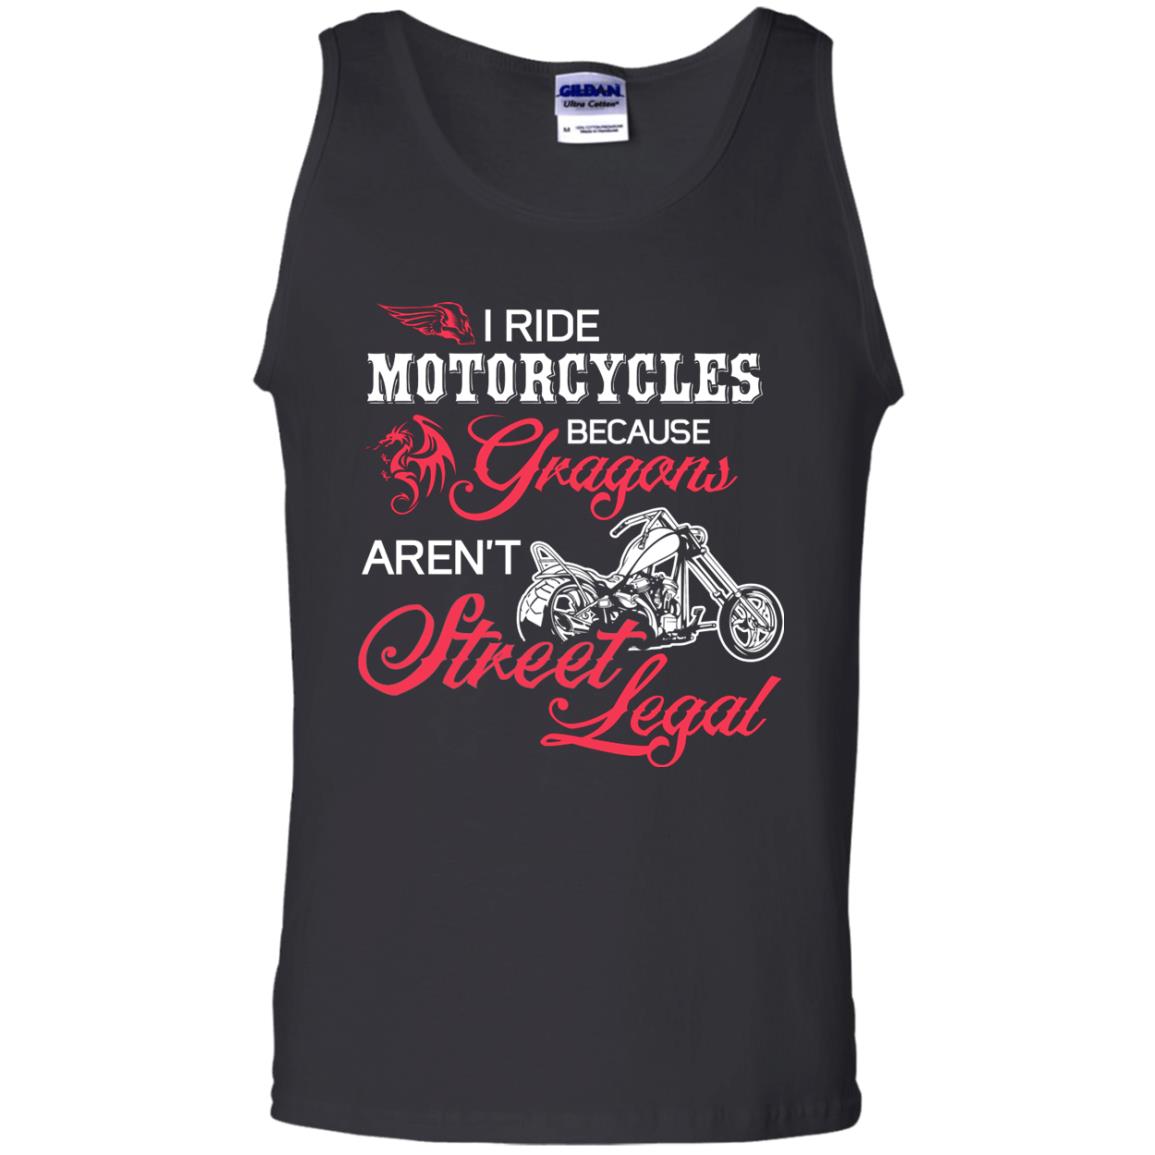 I Ride Motorcycles Because Gragons Aren_t Street Legal Cool Shirt For Biker